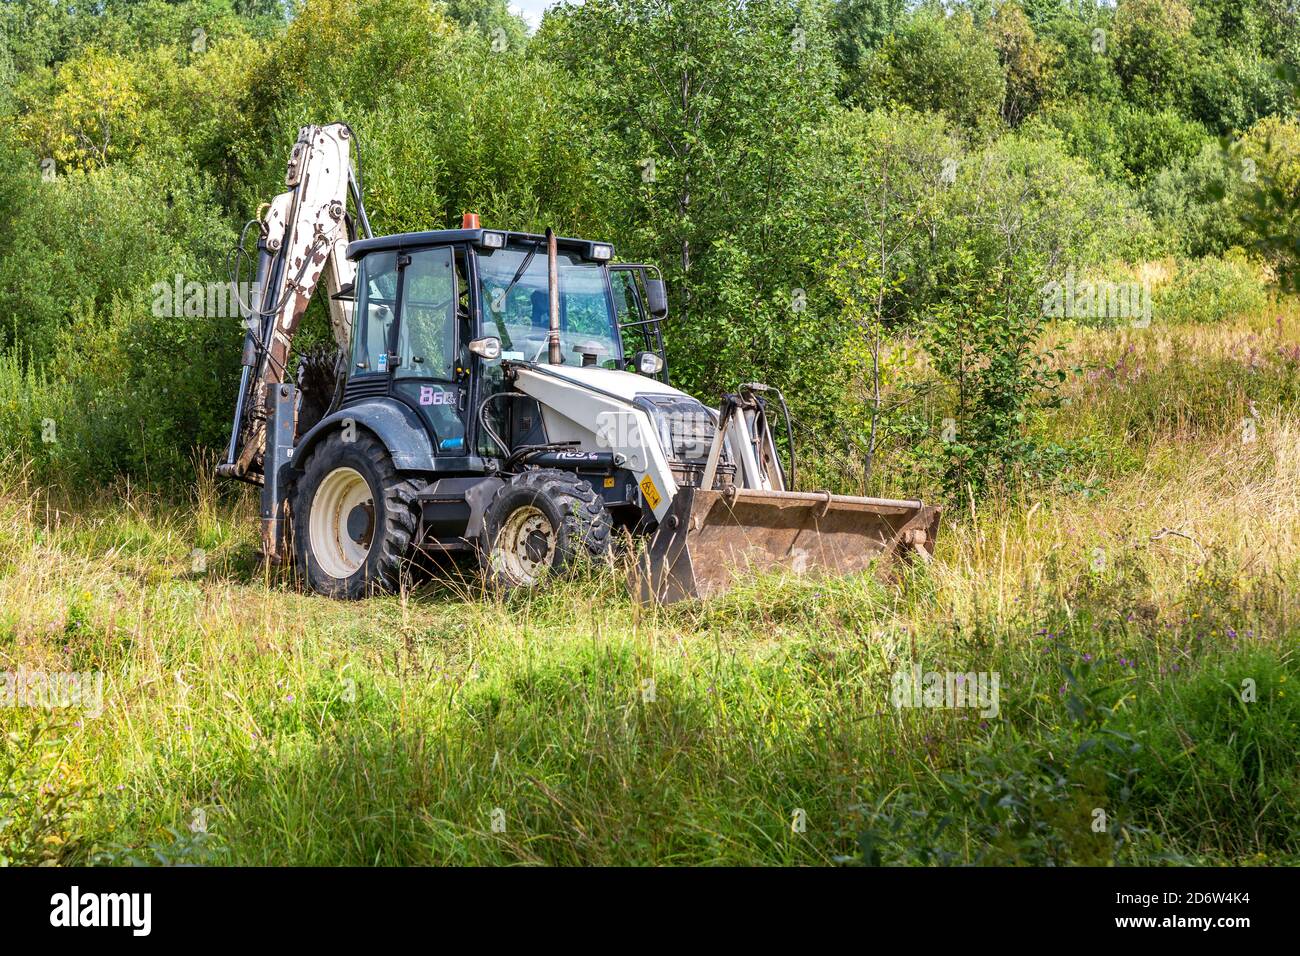 Novgorod, Russia - August 14, 2020: Bulldozer working at the countryside in summer day Stock Photo